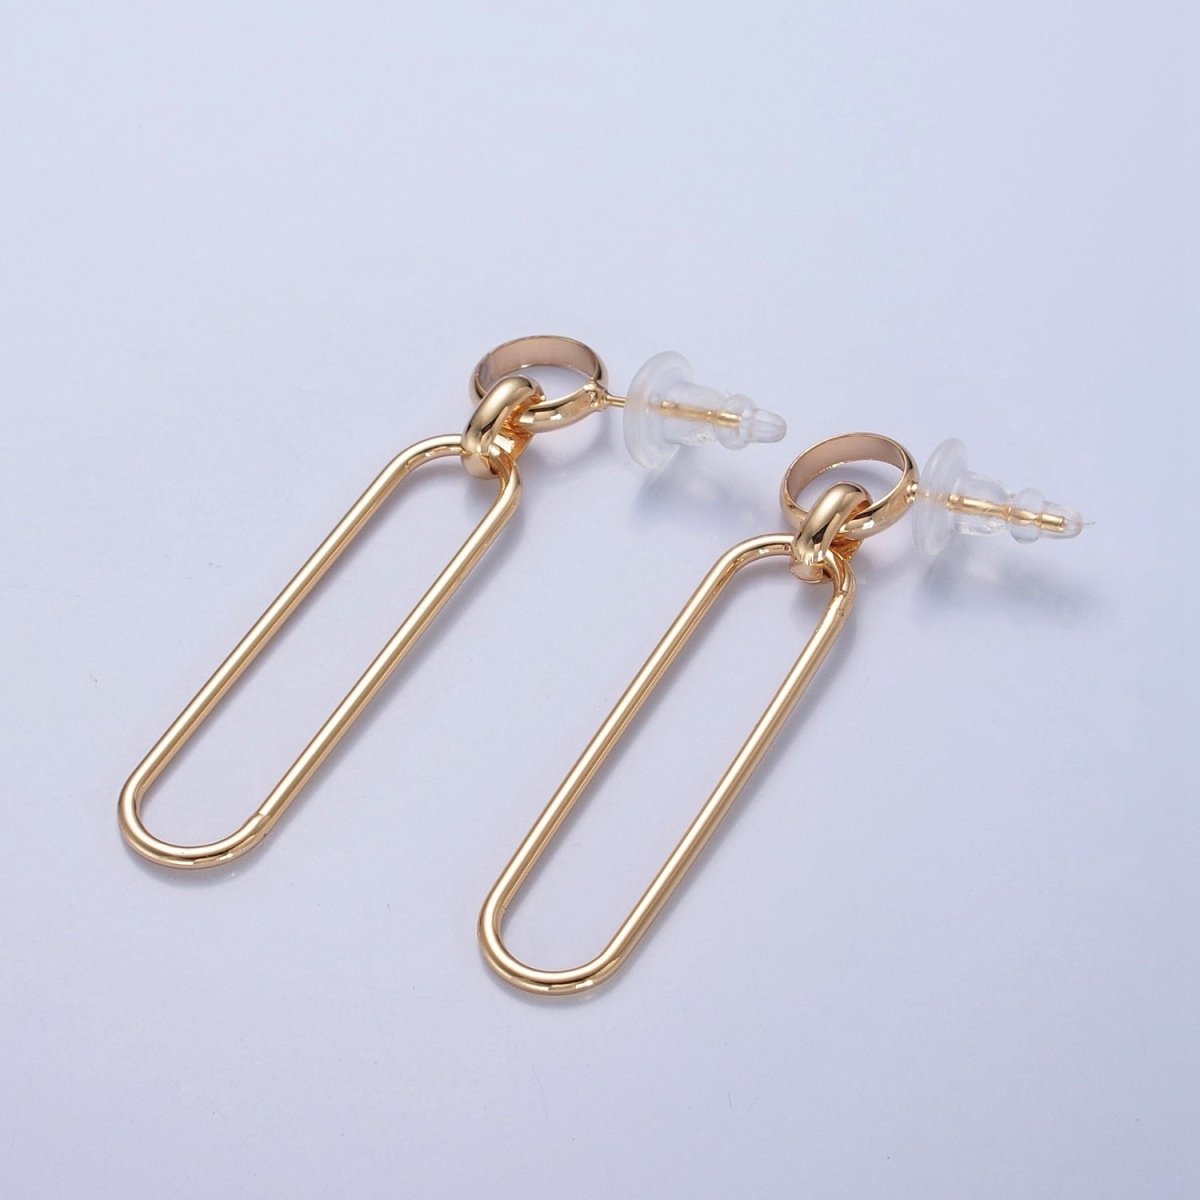 18K Gold Plated Oval Earrings, Geometric Drops, Unique Lightweight Studs V-388 - DLUXCA